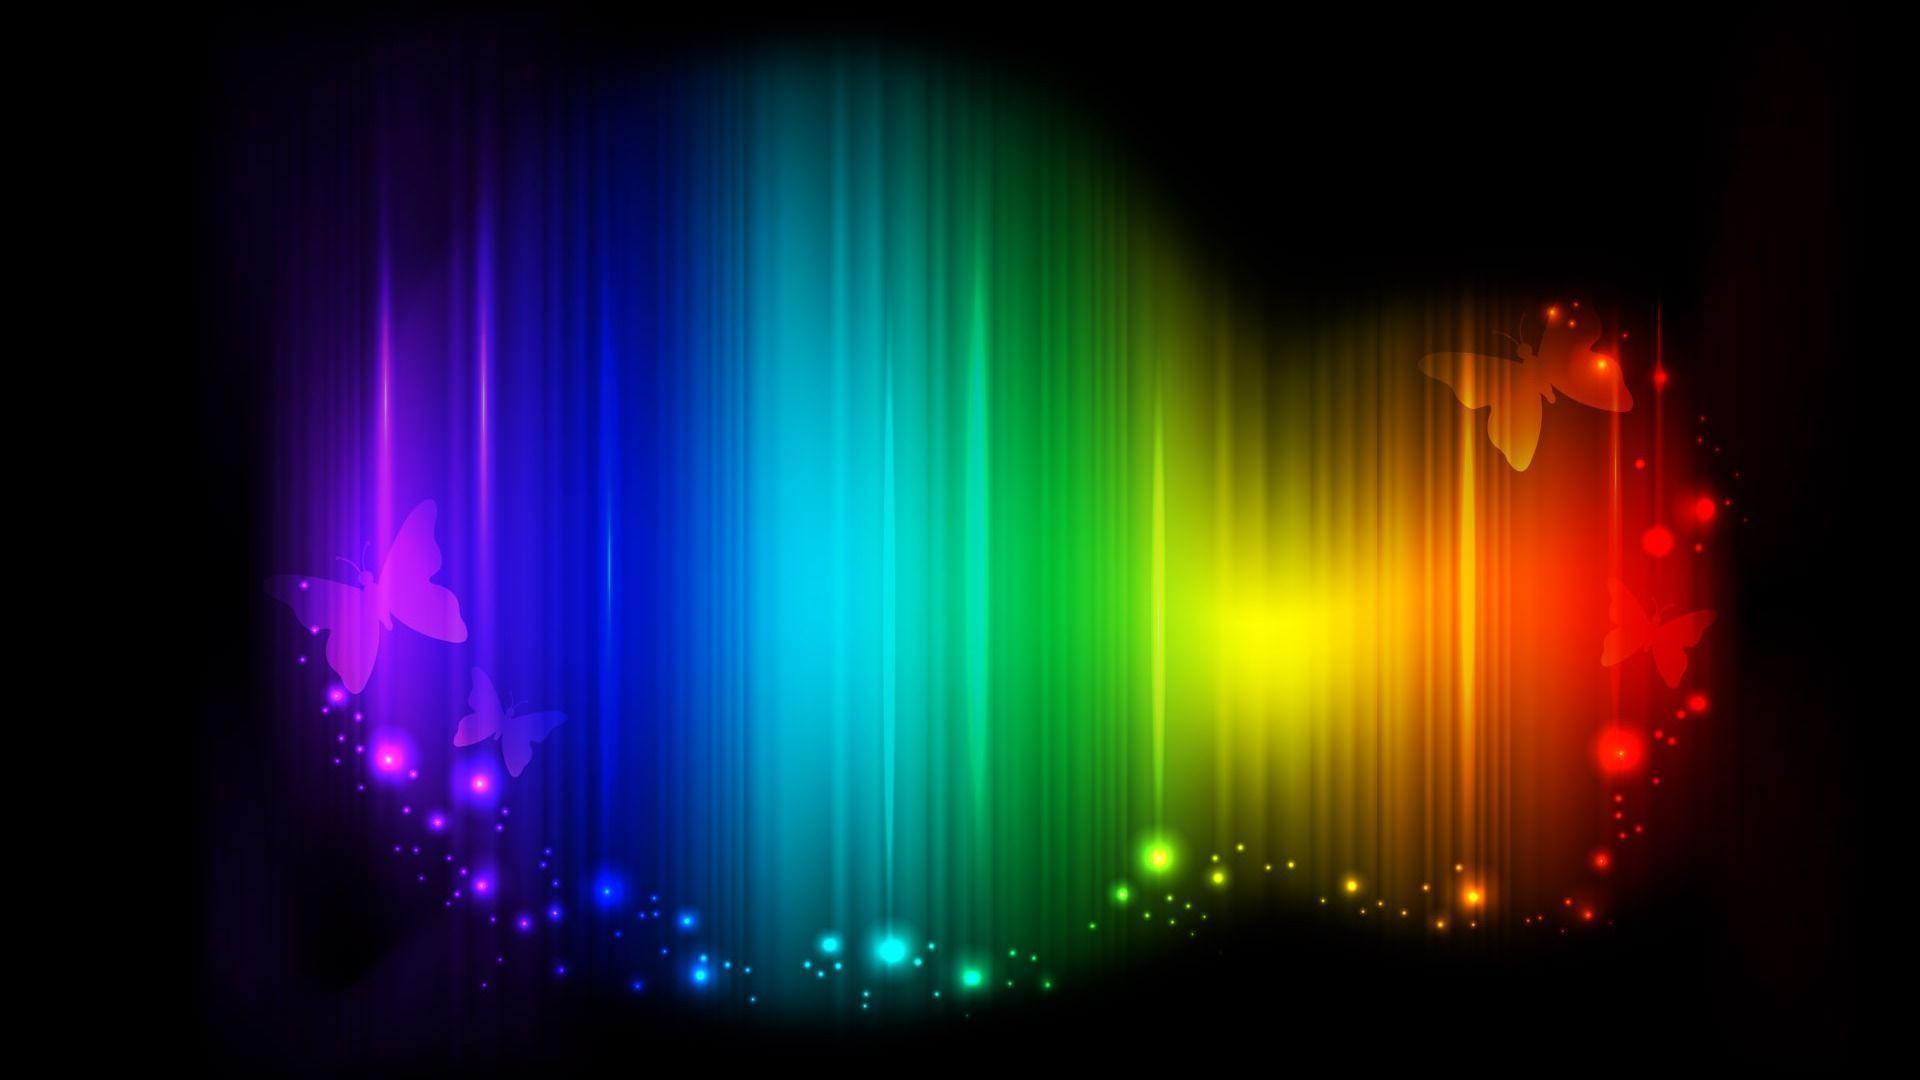 Wallpaper For > Colorful Background Designs